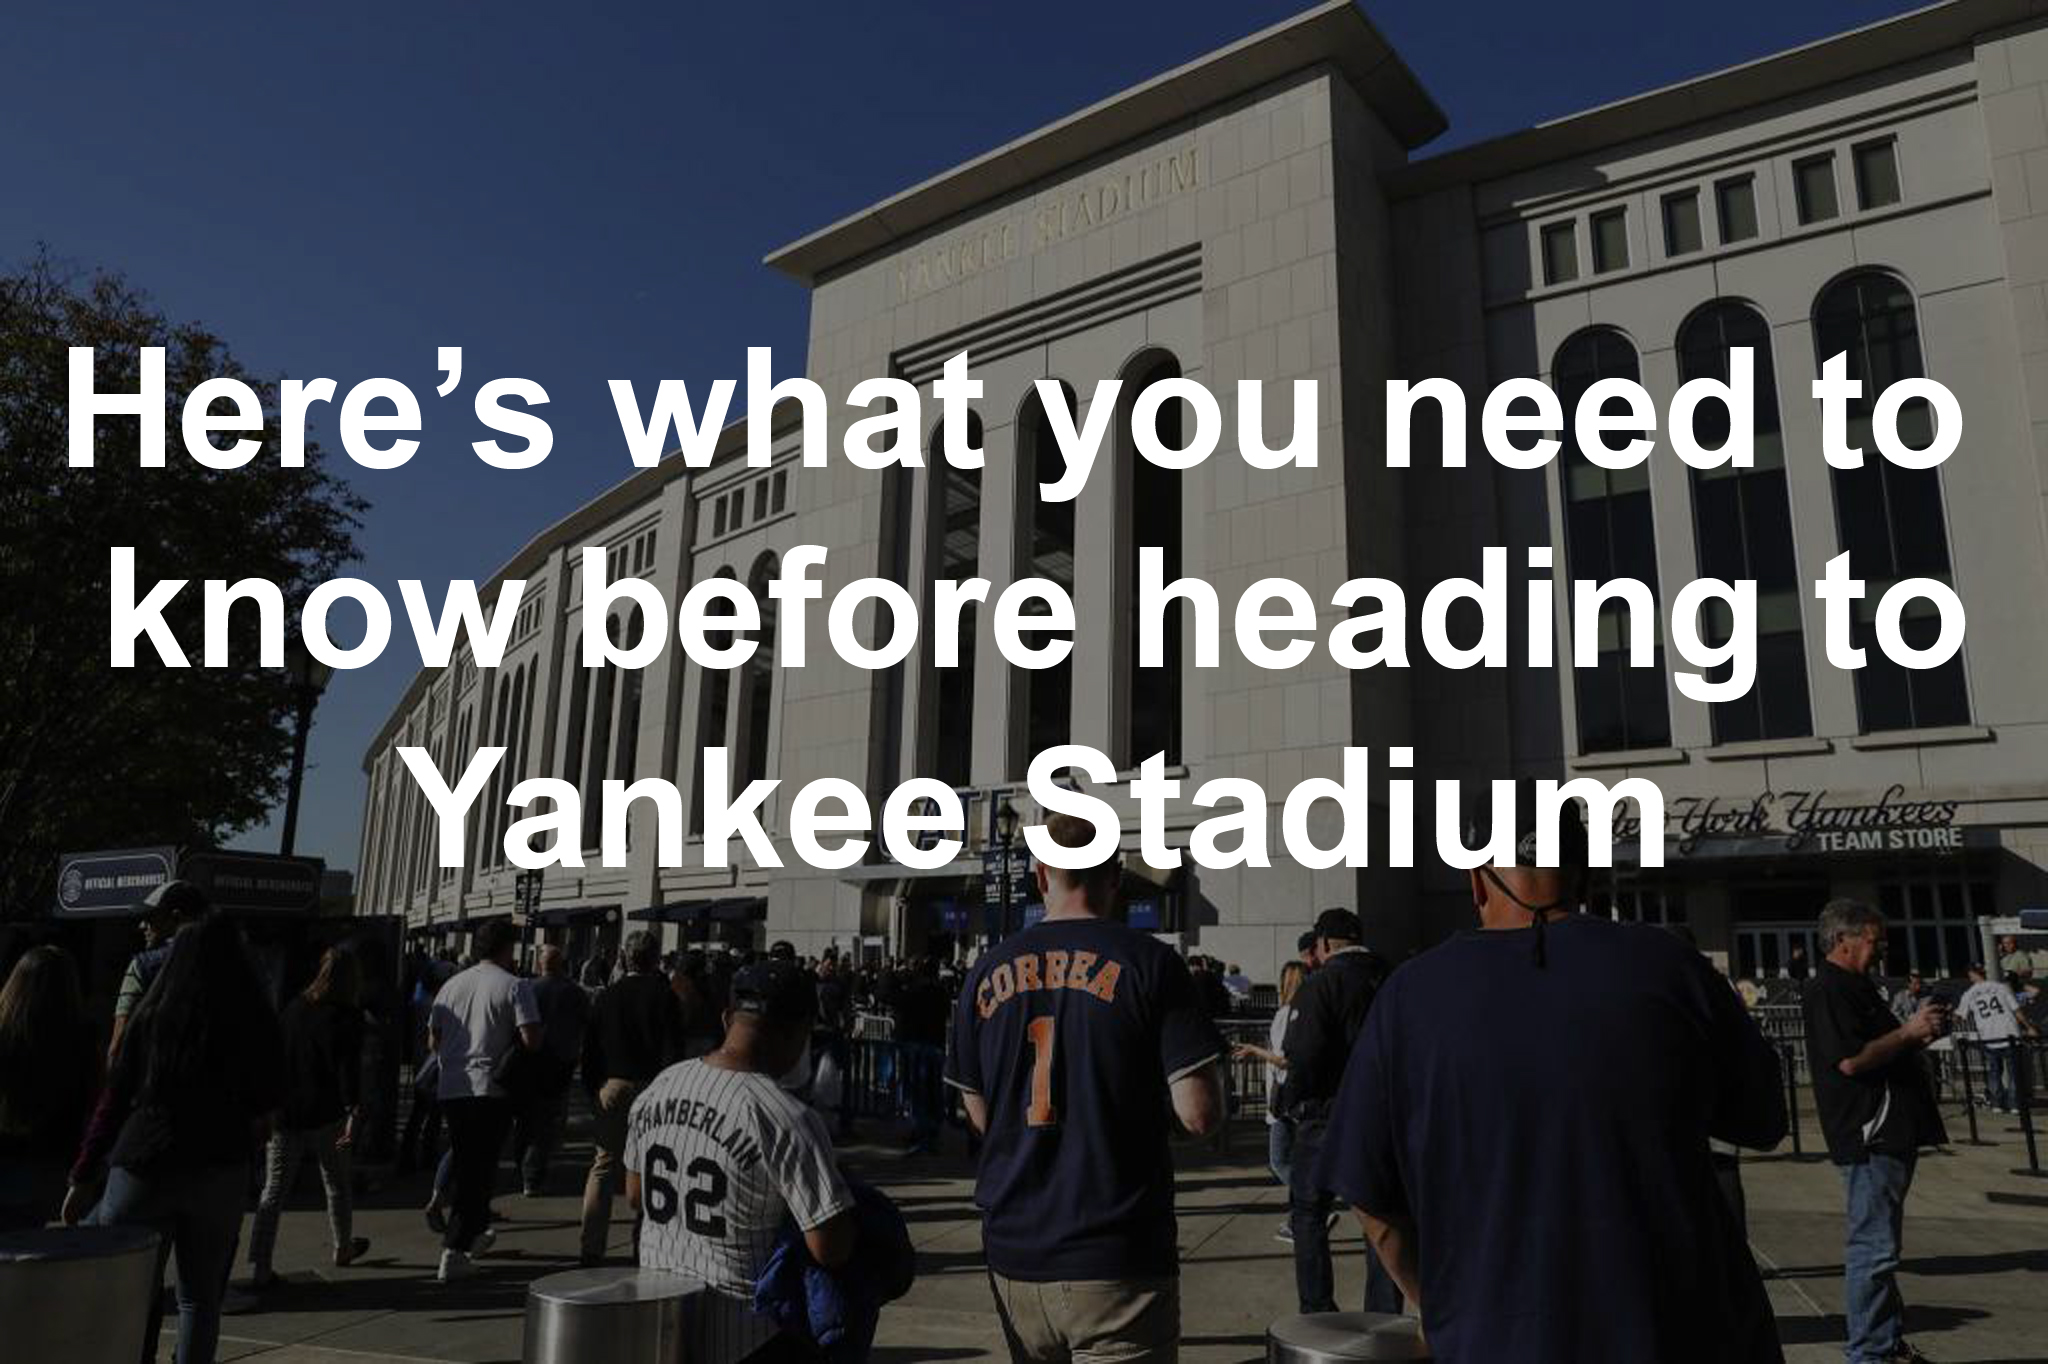 Snow blankets Yankee Stadium, forces home opener to be postponed – New York  Daily News